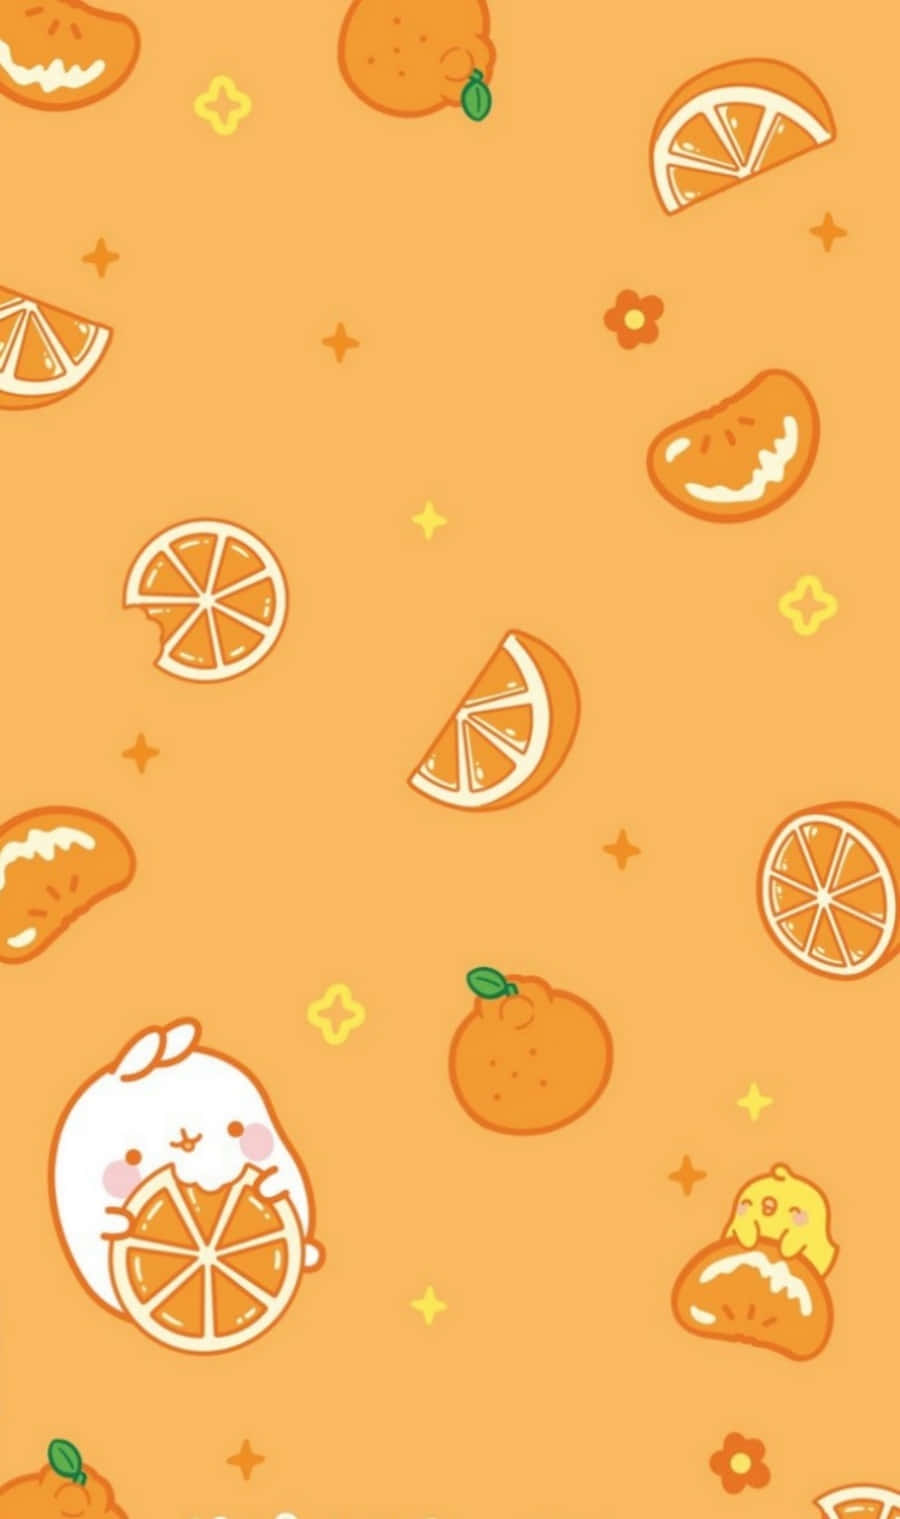 Cute Orange Fruits And Slices